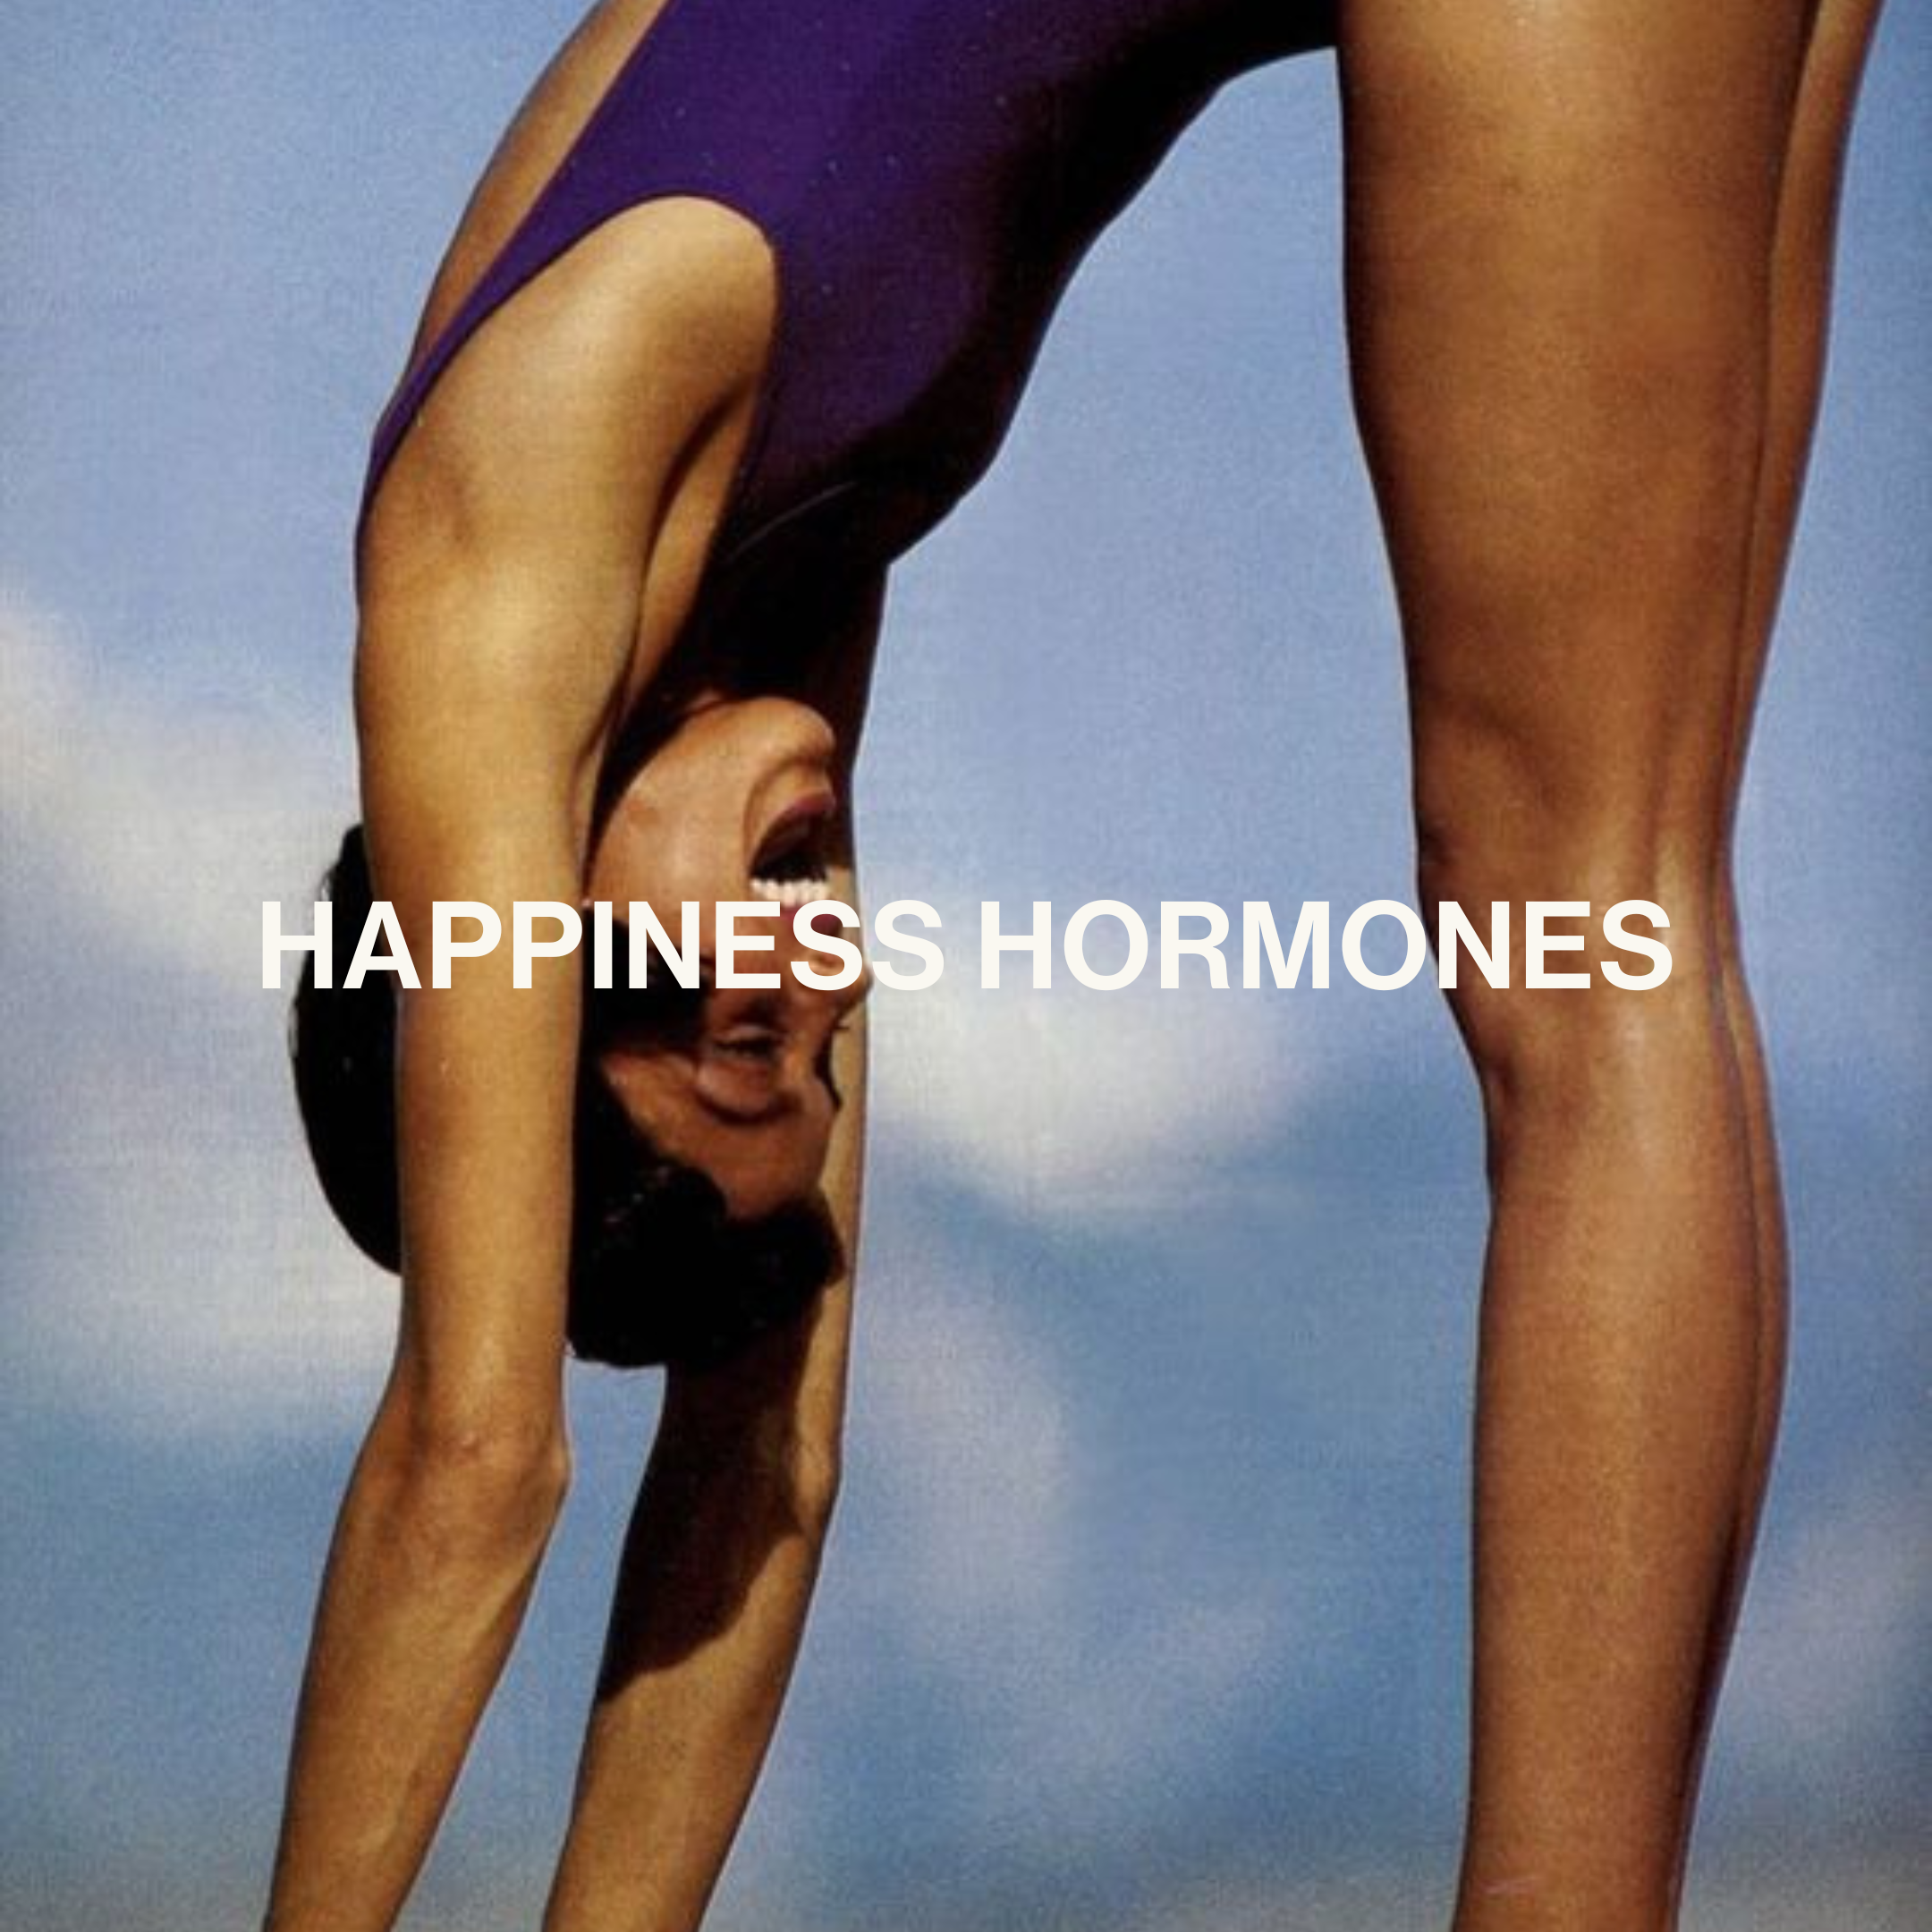 Happiness hormones and how to boost them naturally